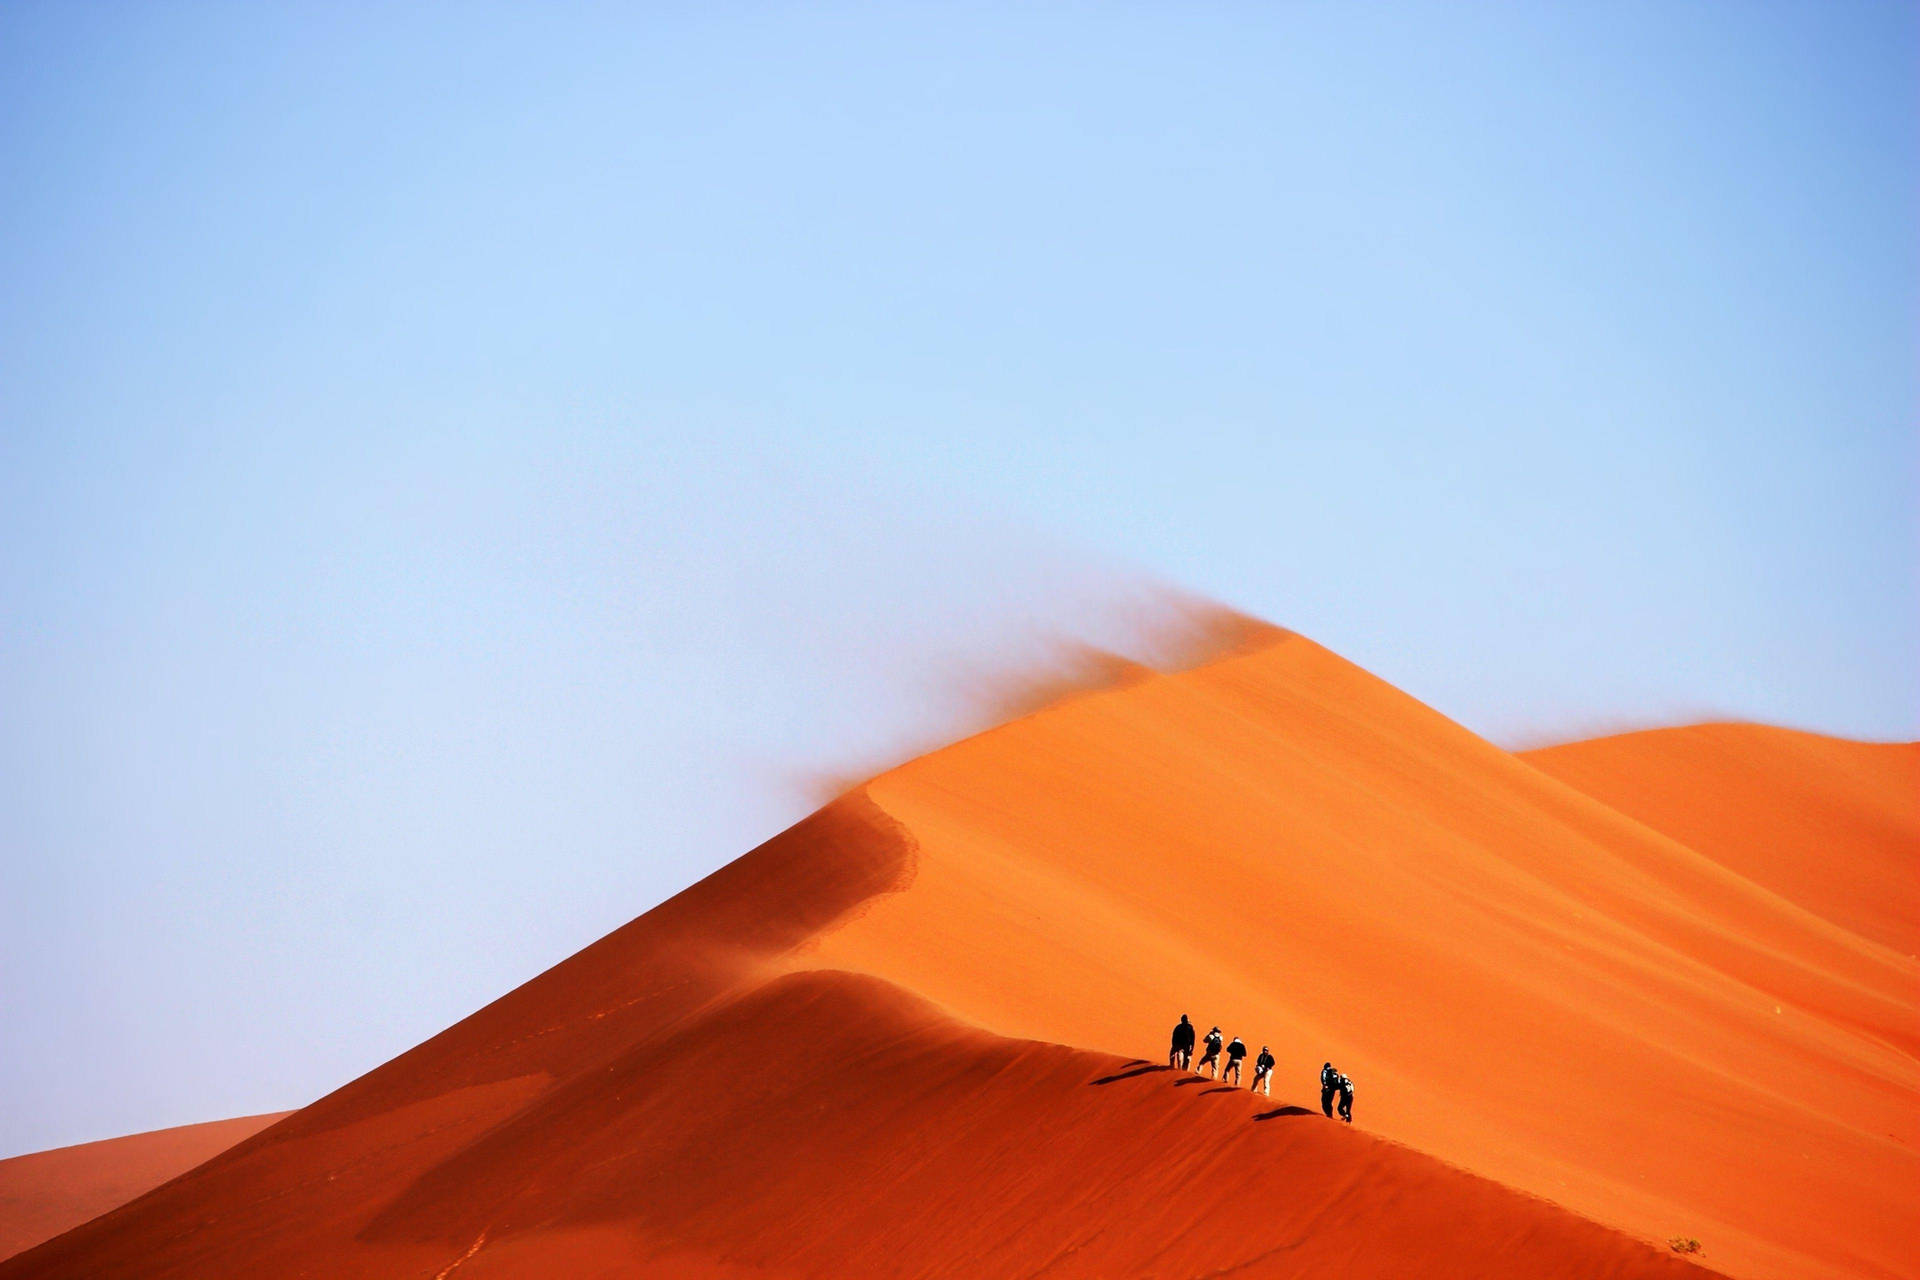 1) A Group Of People Seeking Adventure, Braving The Elements In A Windy Desert!